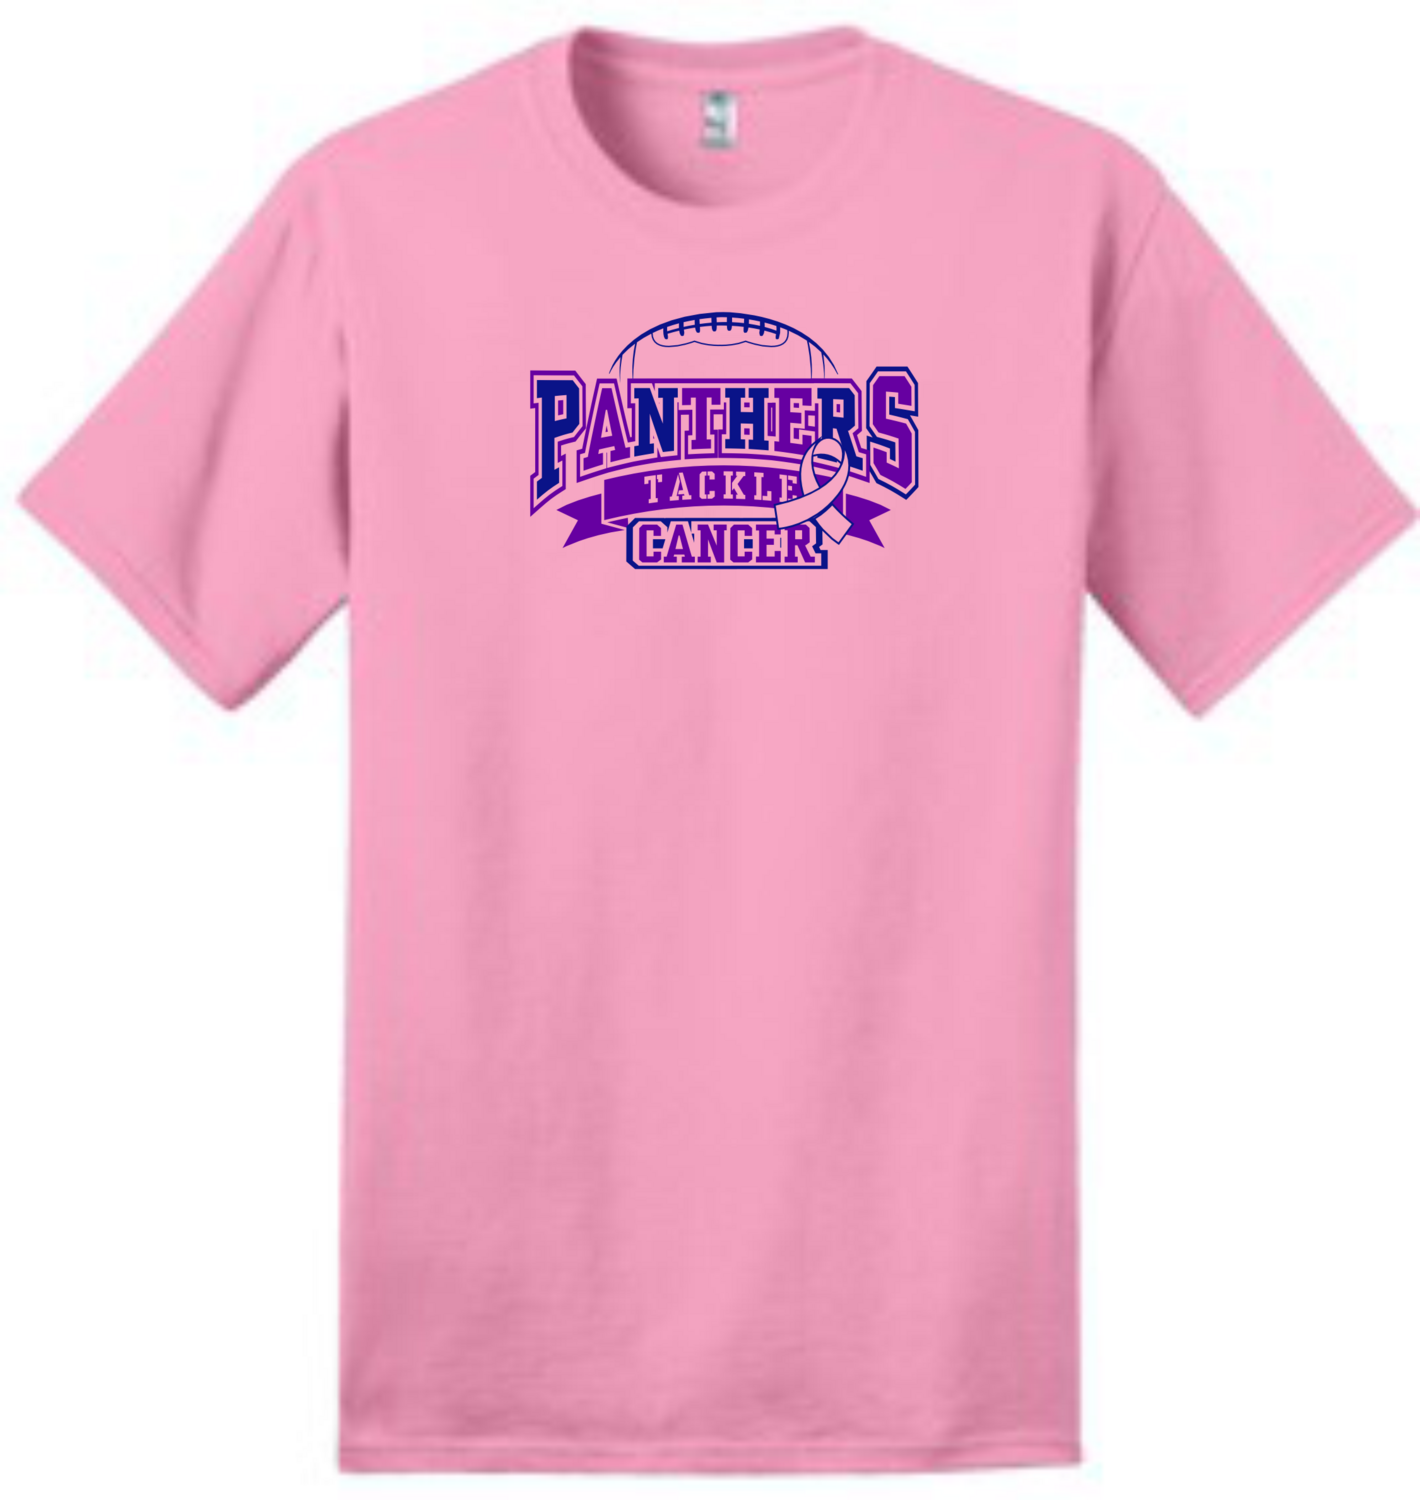 Panthers Tackle Cancer Tee